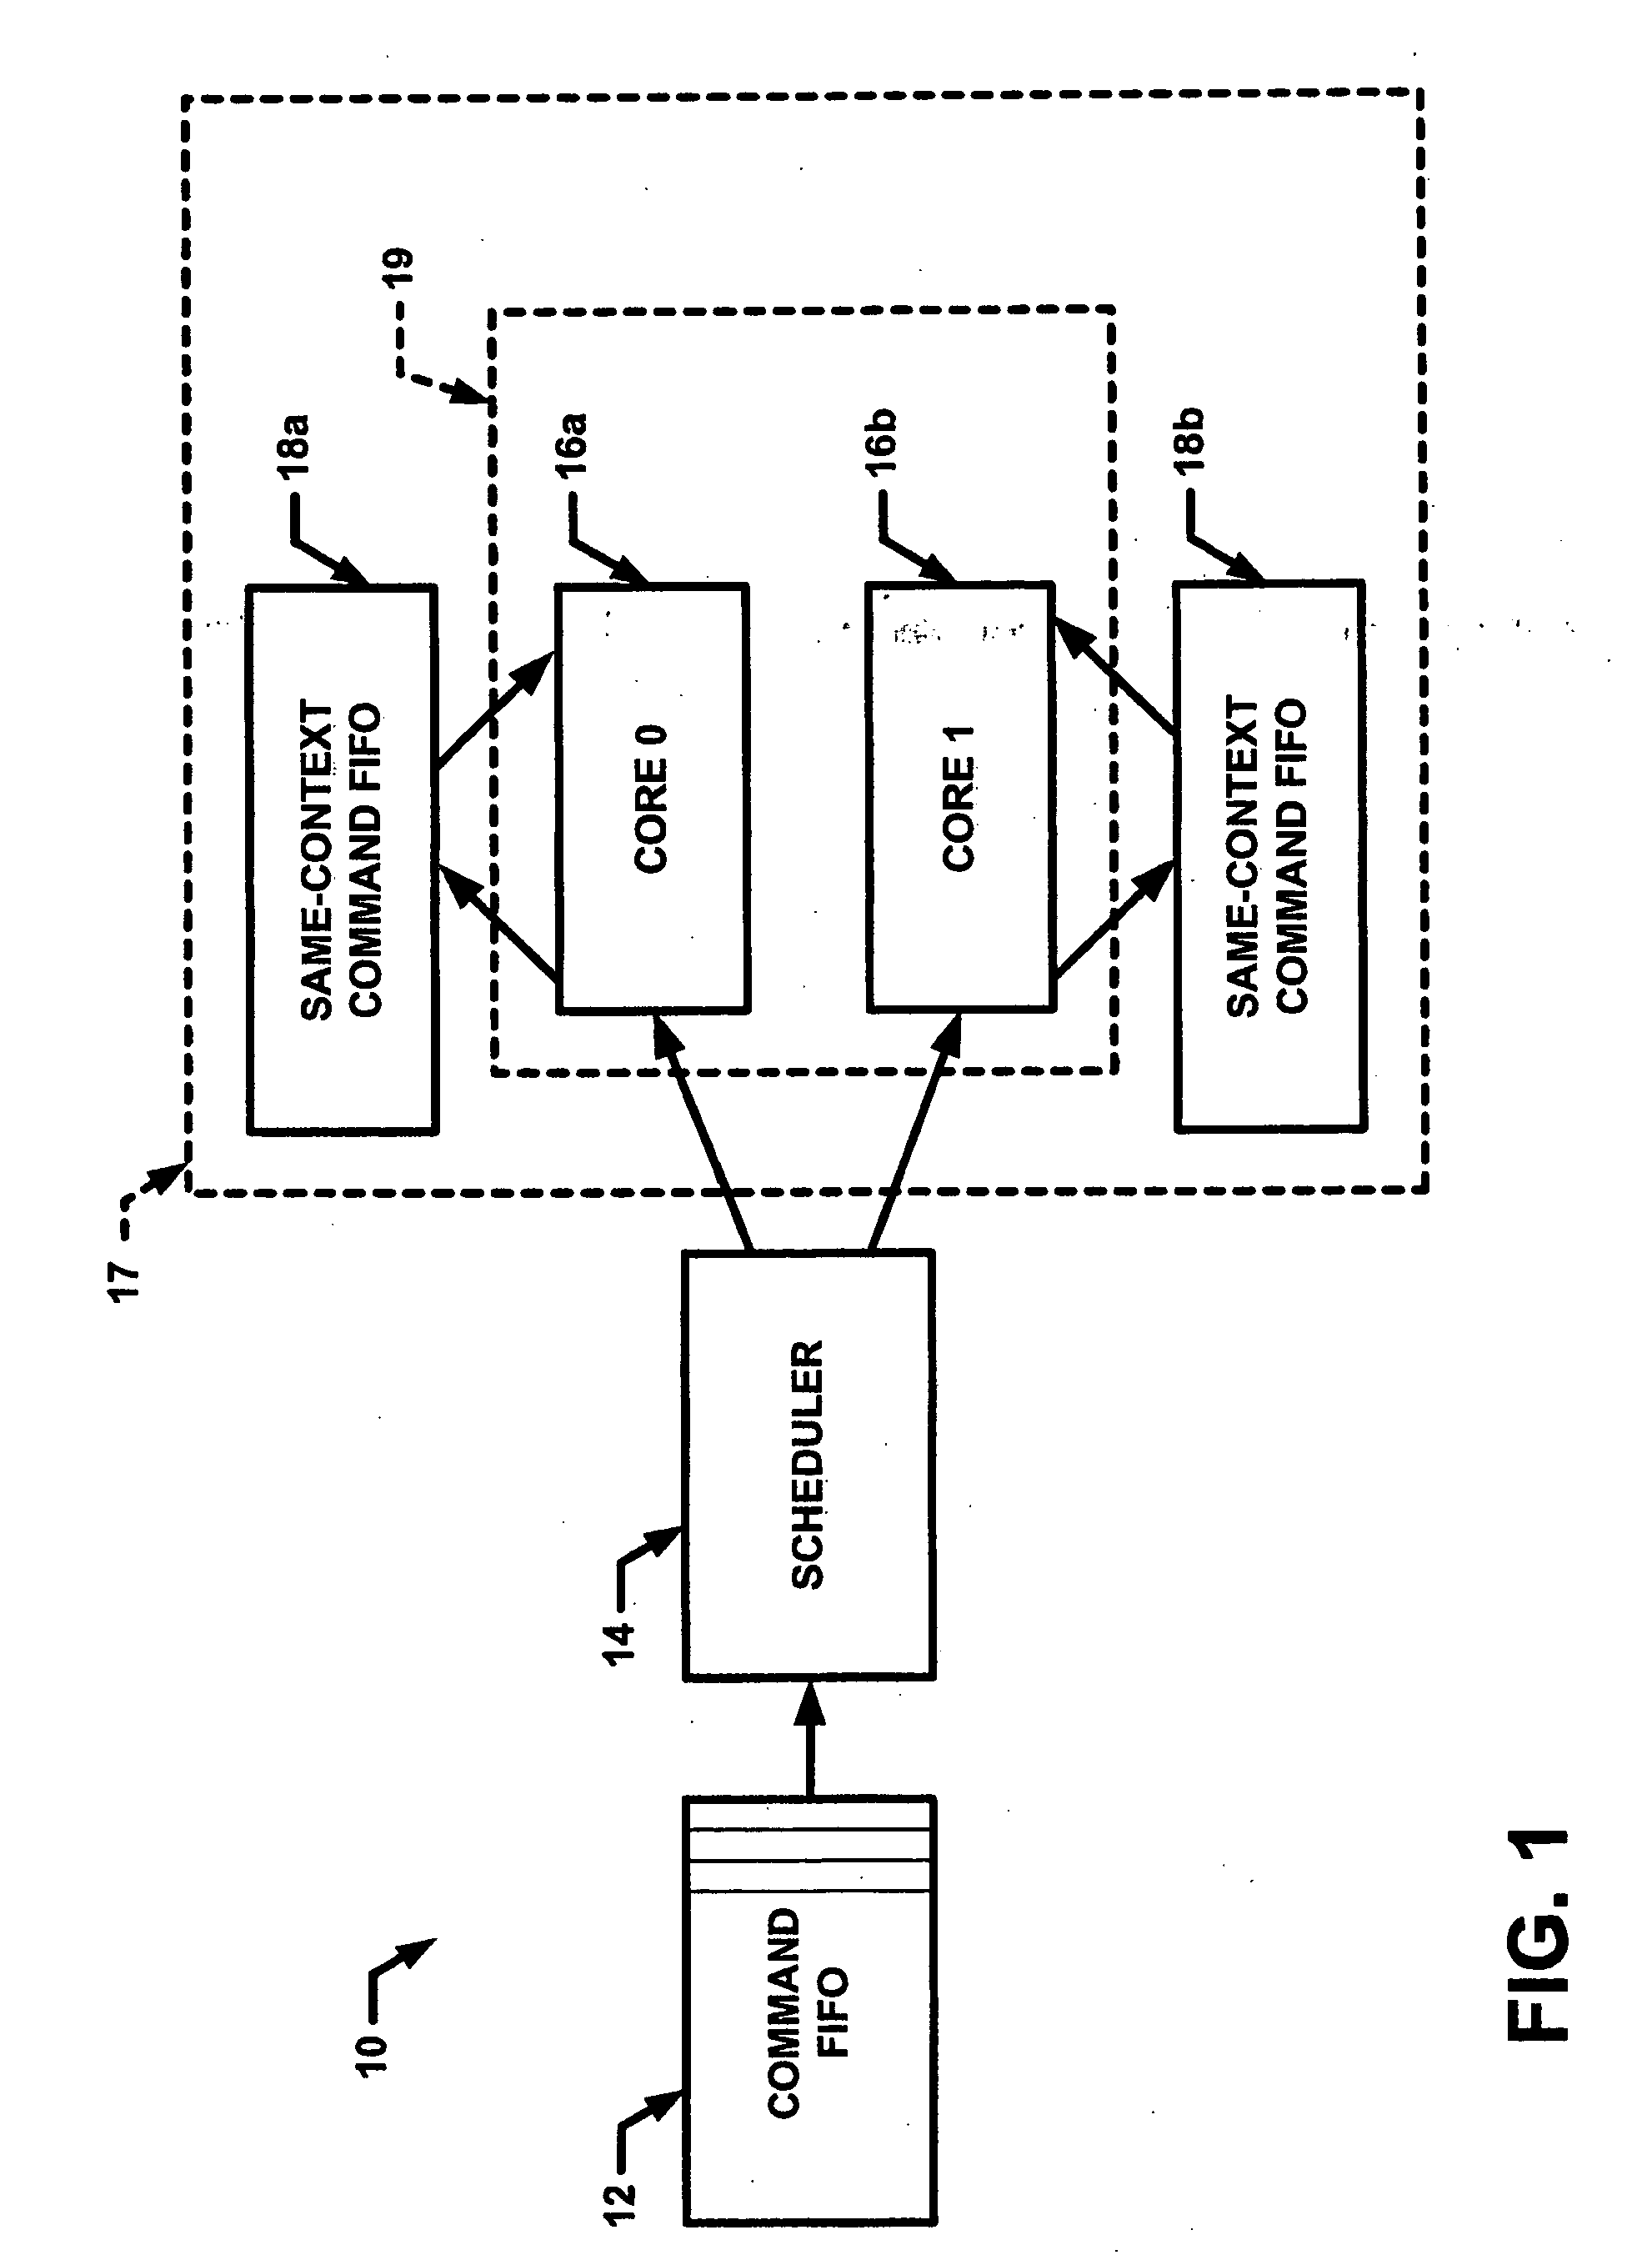 Method and apparatus for scheduling the processing of commands for execution by cryptographic algorithm cores in a programmable network processor